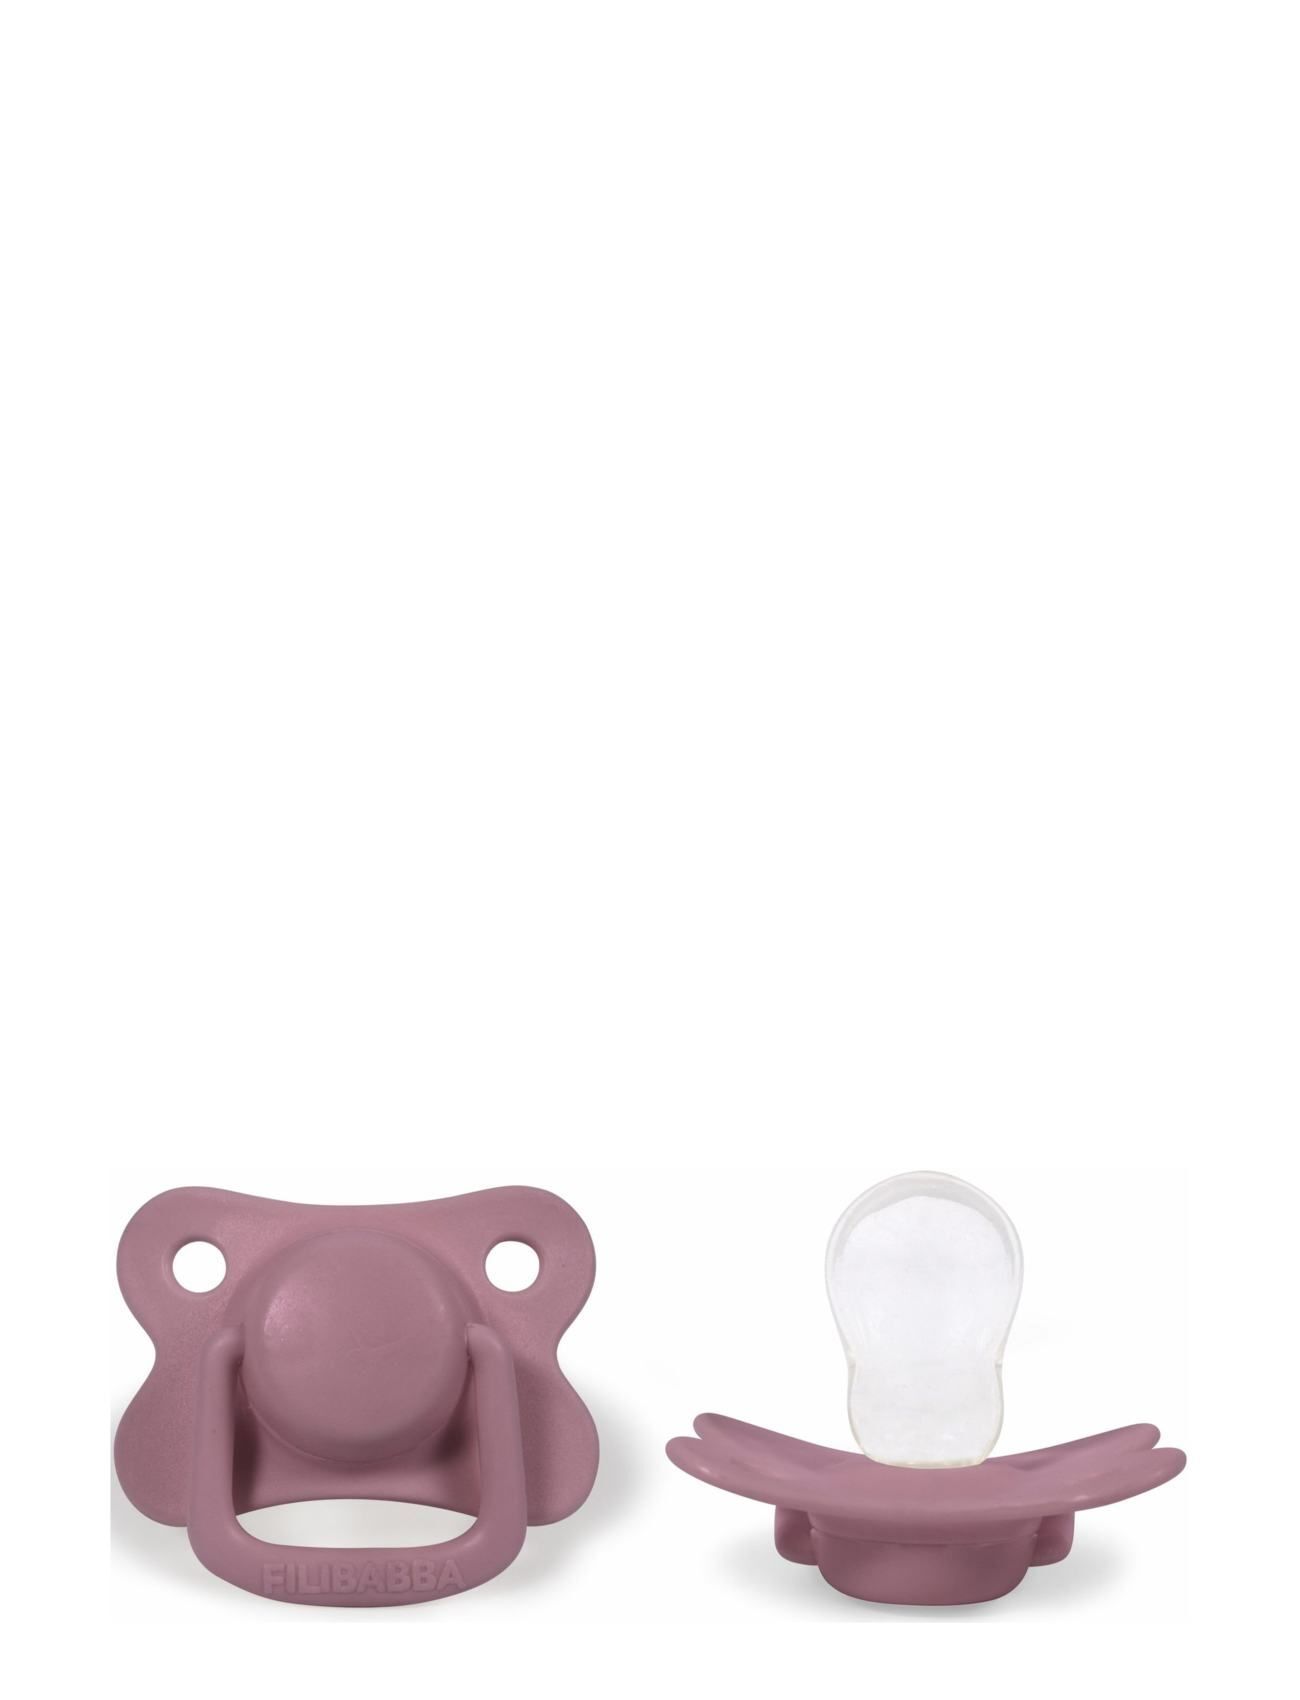 Filibabba 2-Pack Pacifiers - Dusty Rose +6 Months Baby & Maternity Pacifiers Lilla Filibabba